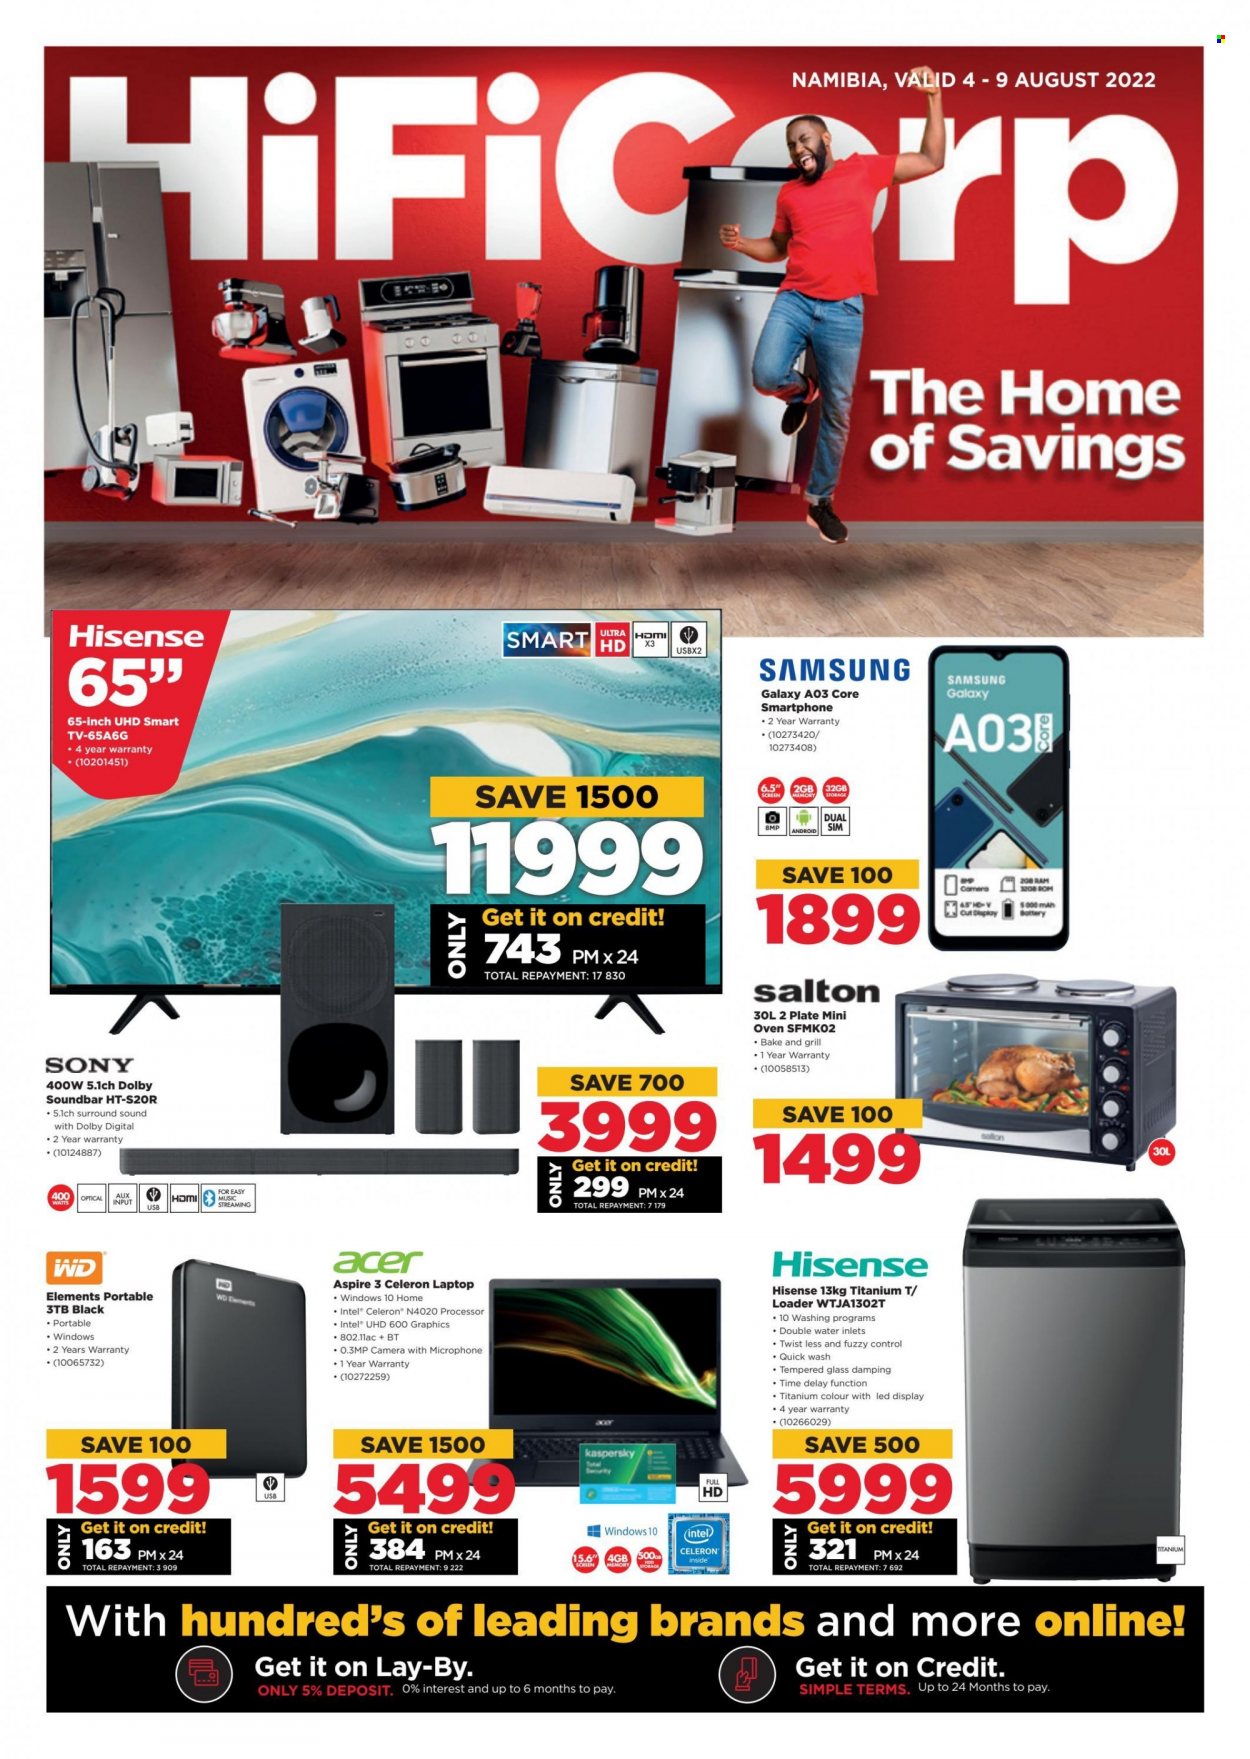 HiFiCorp catalogue  - 04/08/2022 - 09/08/2022 - Sales products - Intel, Acer, Samsung Galaxy, Sony, Samsung, Hisense, smartphone, laptop, WD, camera, smart tv, UHD TV, TV, sound bar, oven. Page 1.